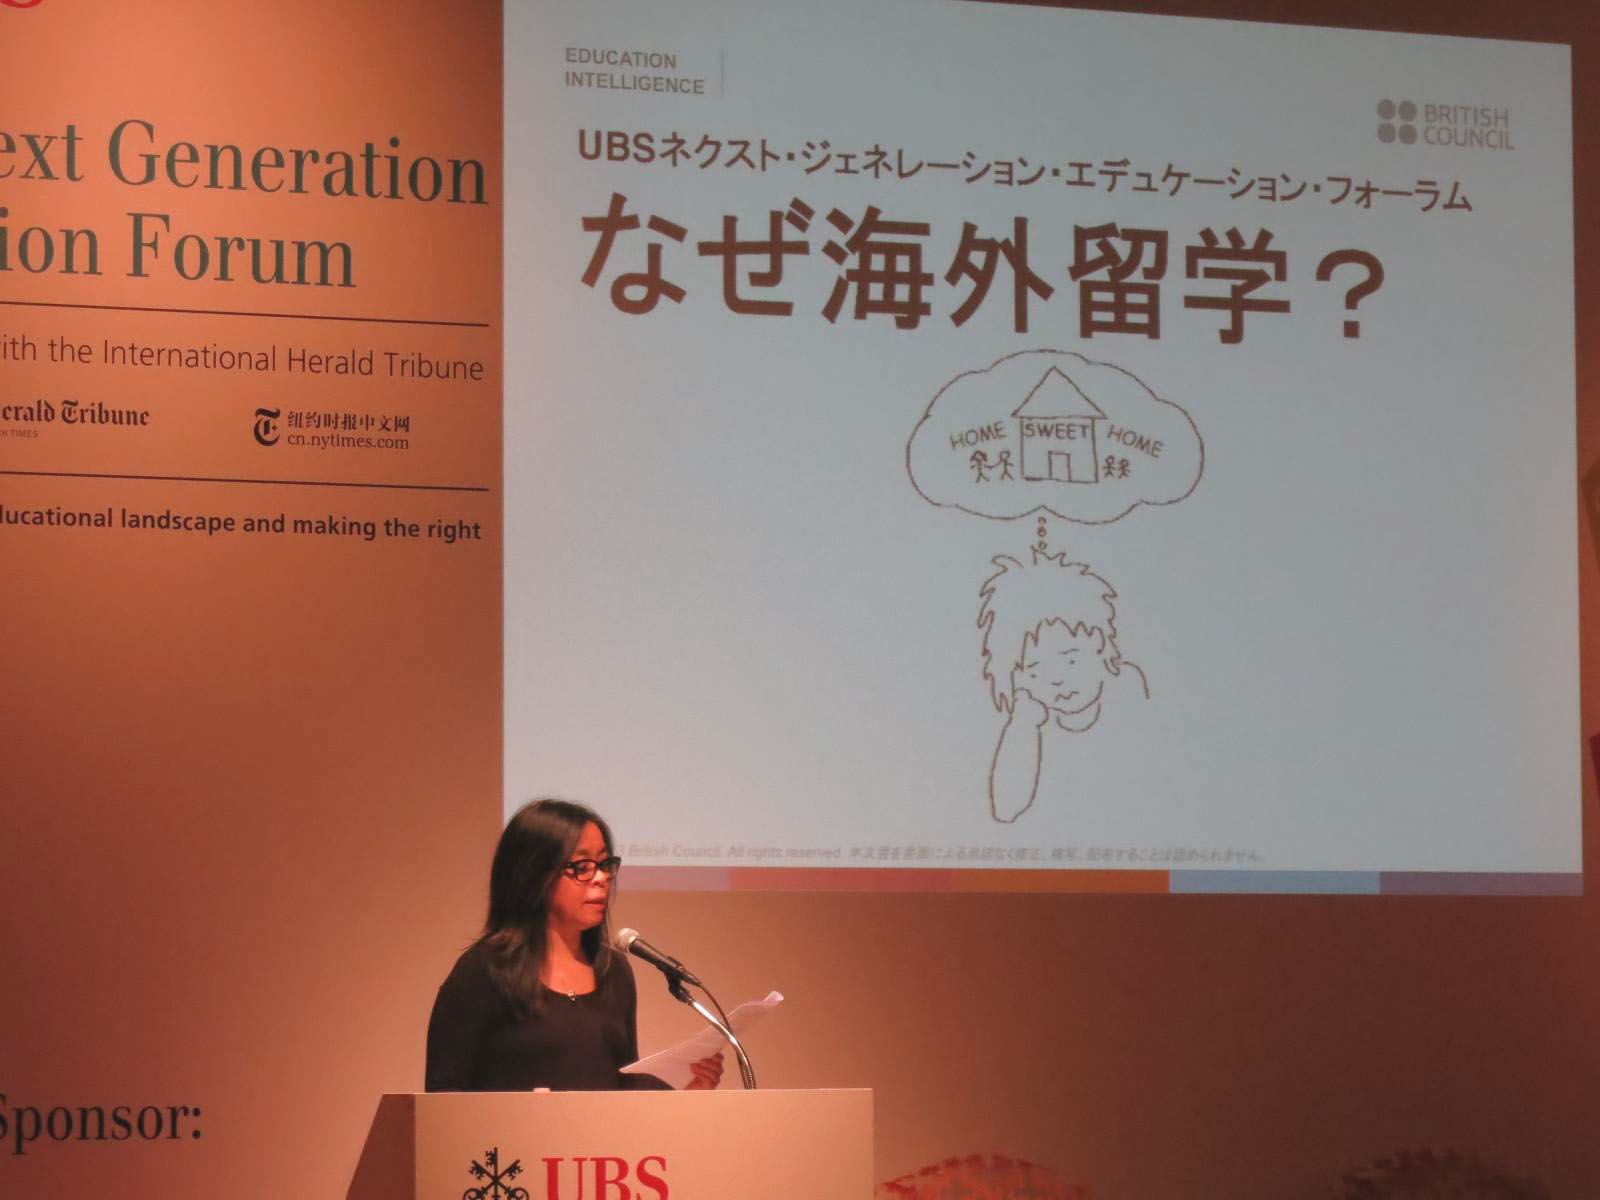 Outward looking: Anna Esaki-Smith, editorial director at the British Council in Hong Kong, addresses the audience at a forum on overseas study in Tokyo on Aug. 22. | KAZUAKI NAGATA